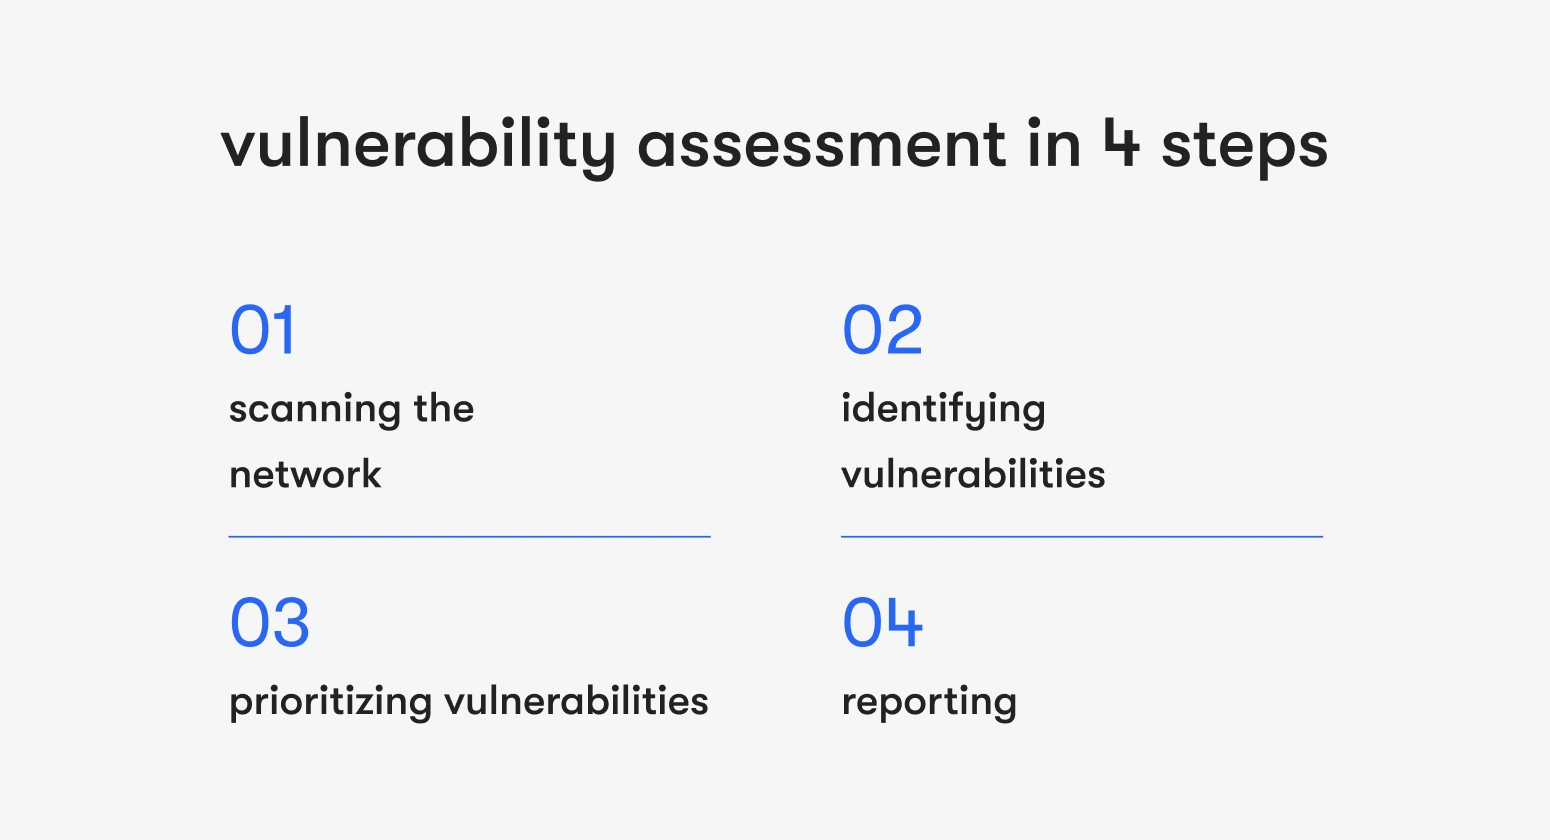 vulnerability assessment as a type of network security assessment